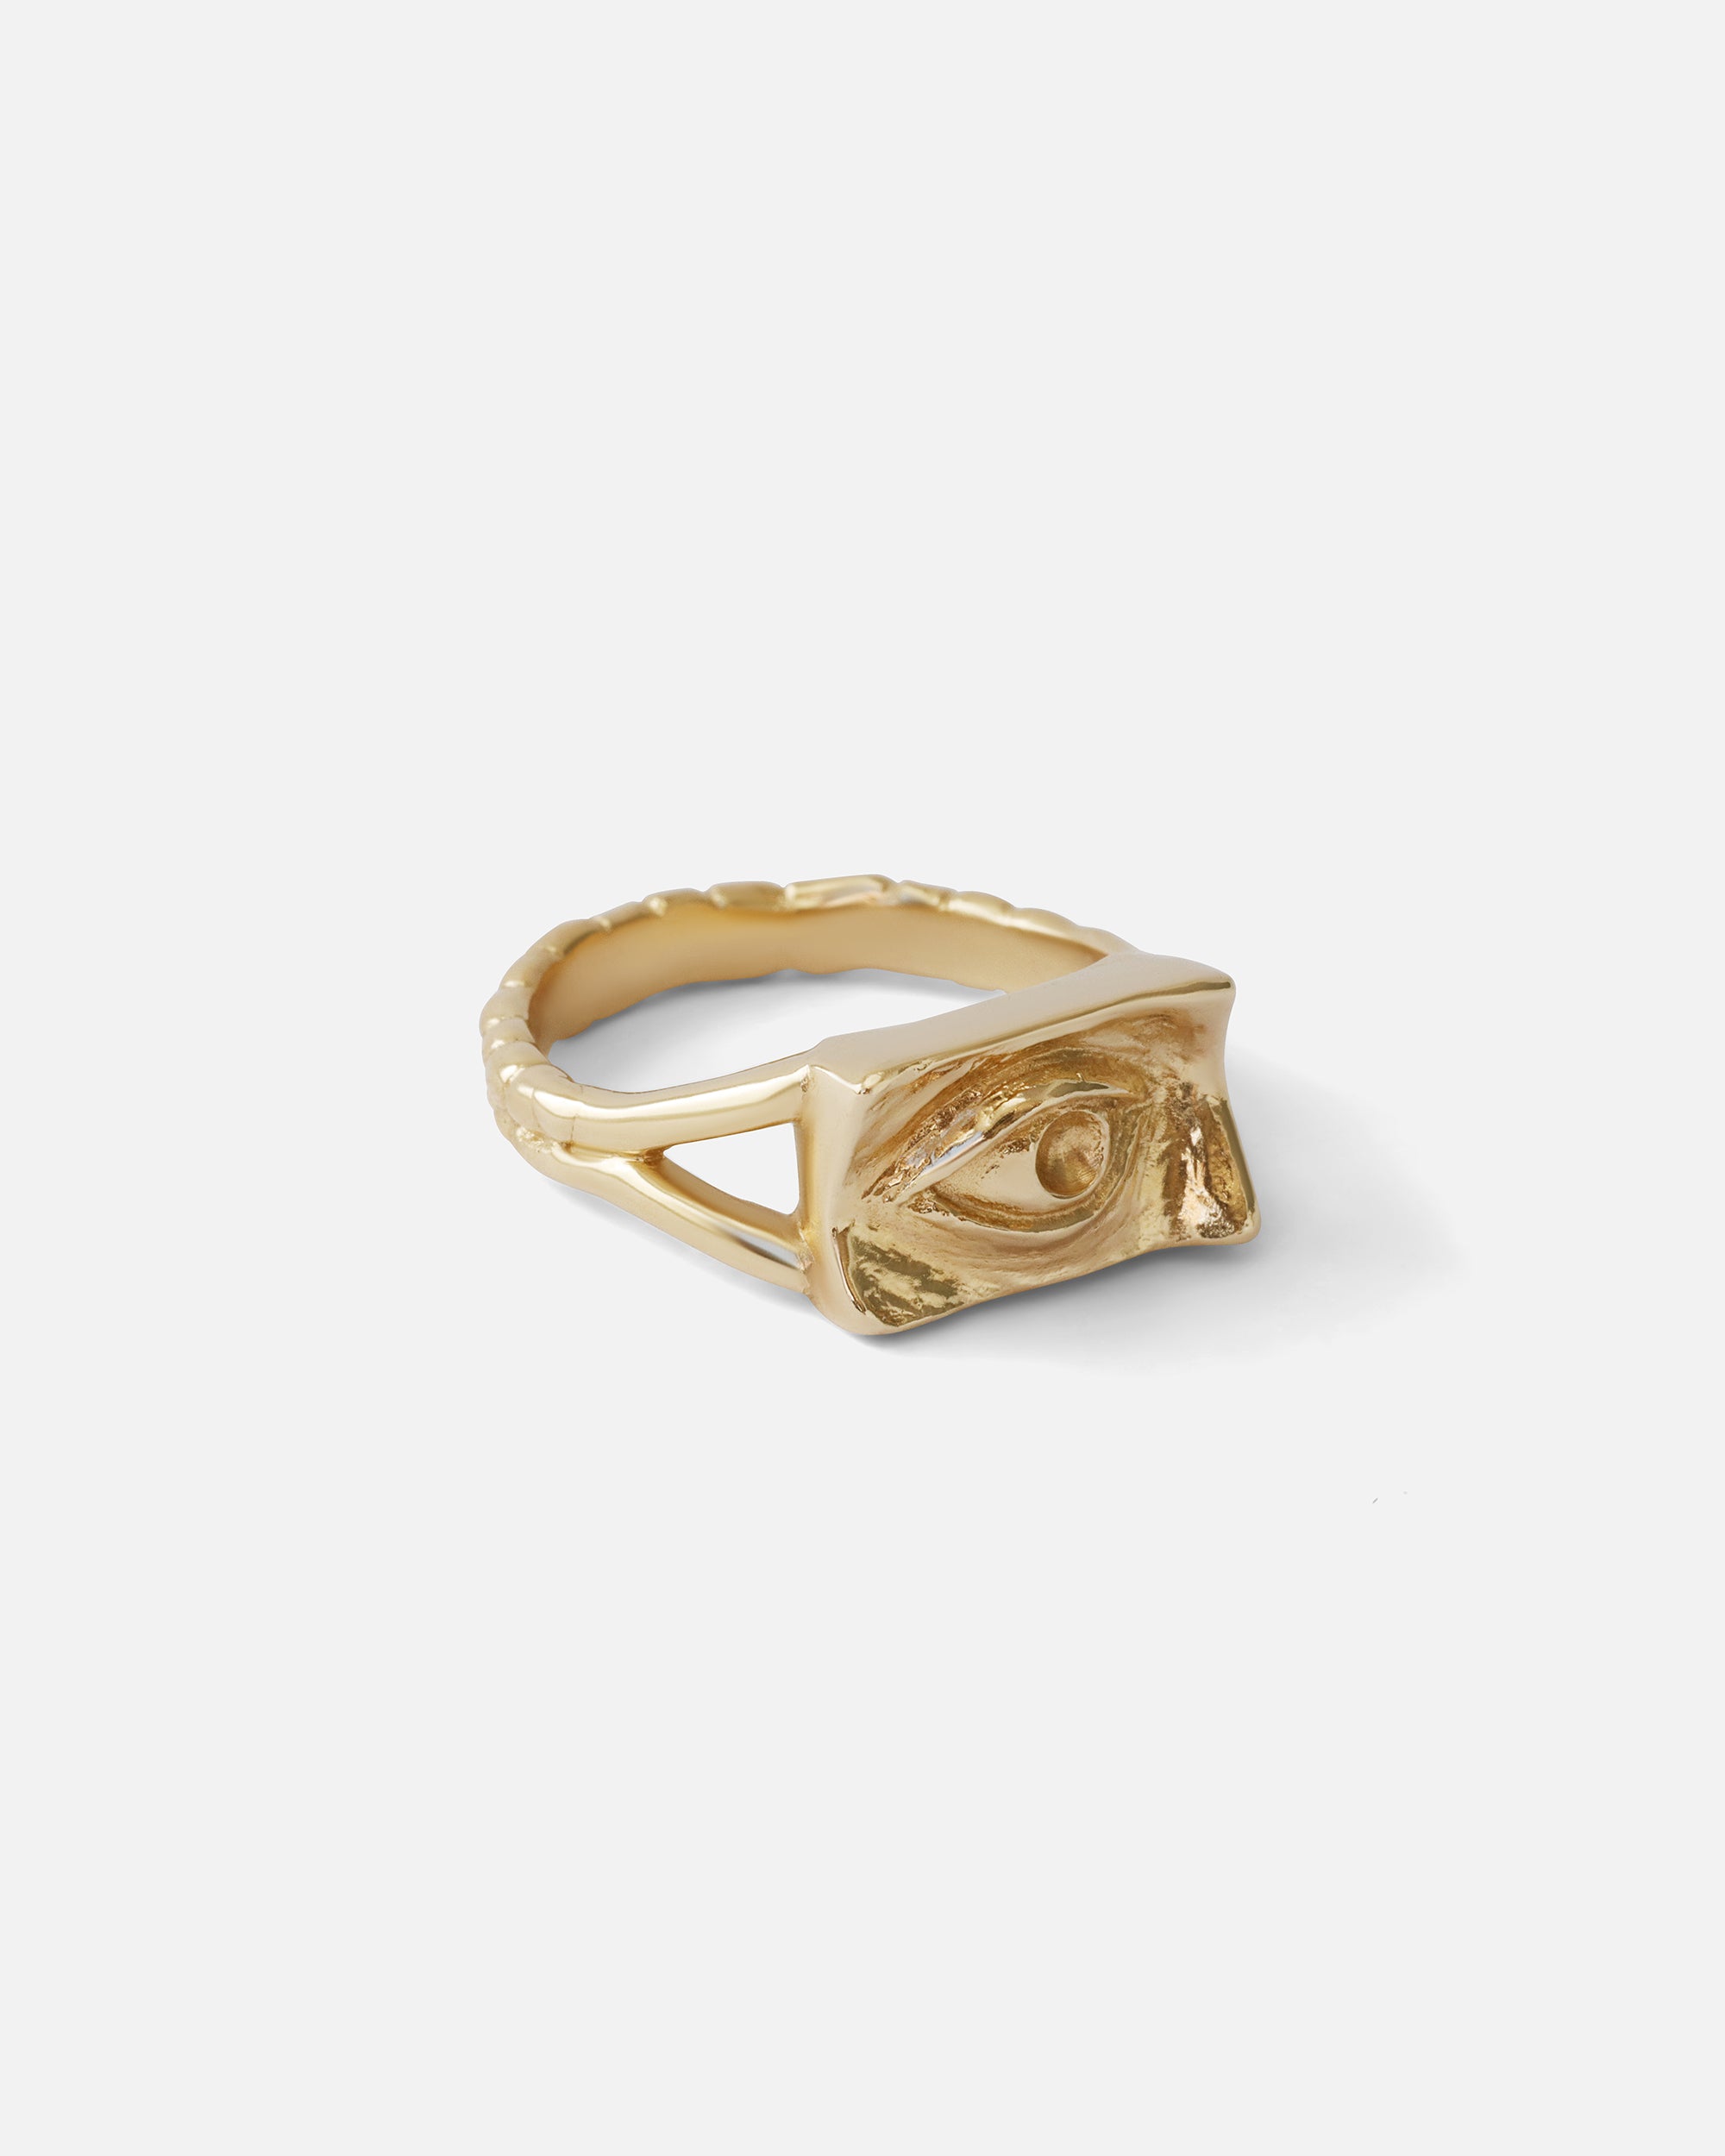 Intagliaux / Ring By Alfonzo in rings Category